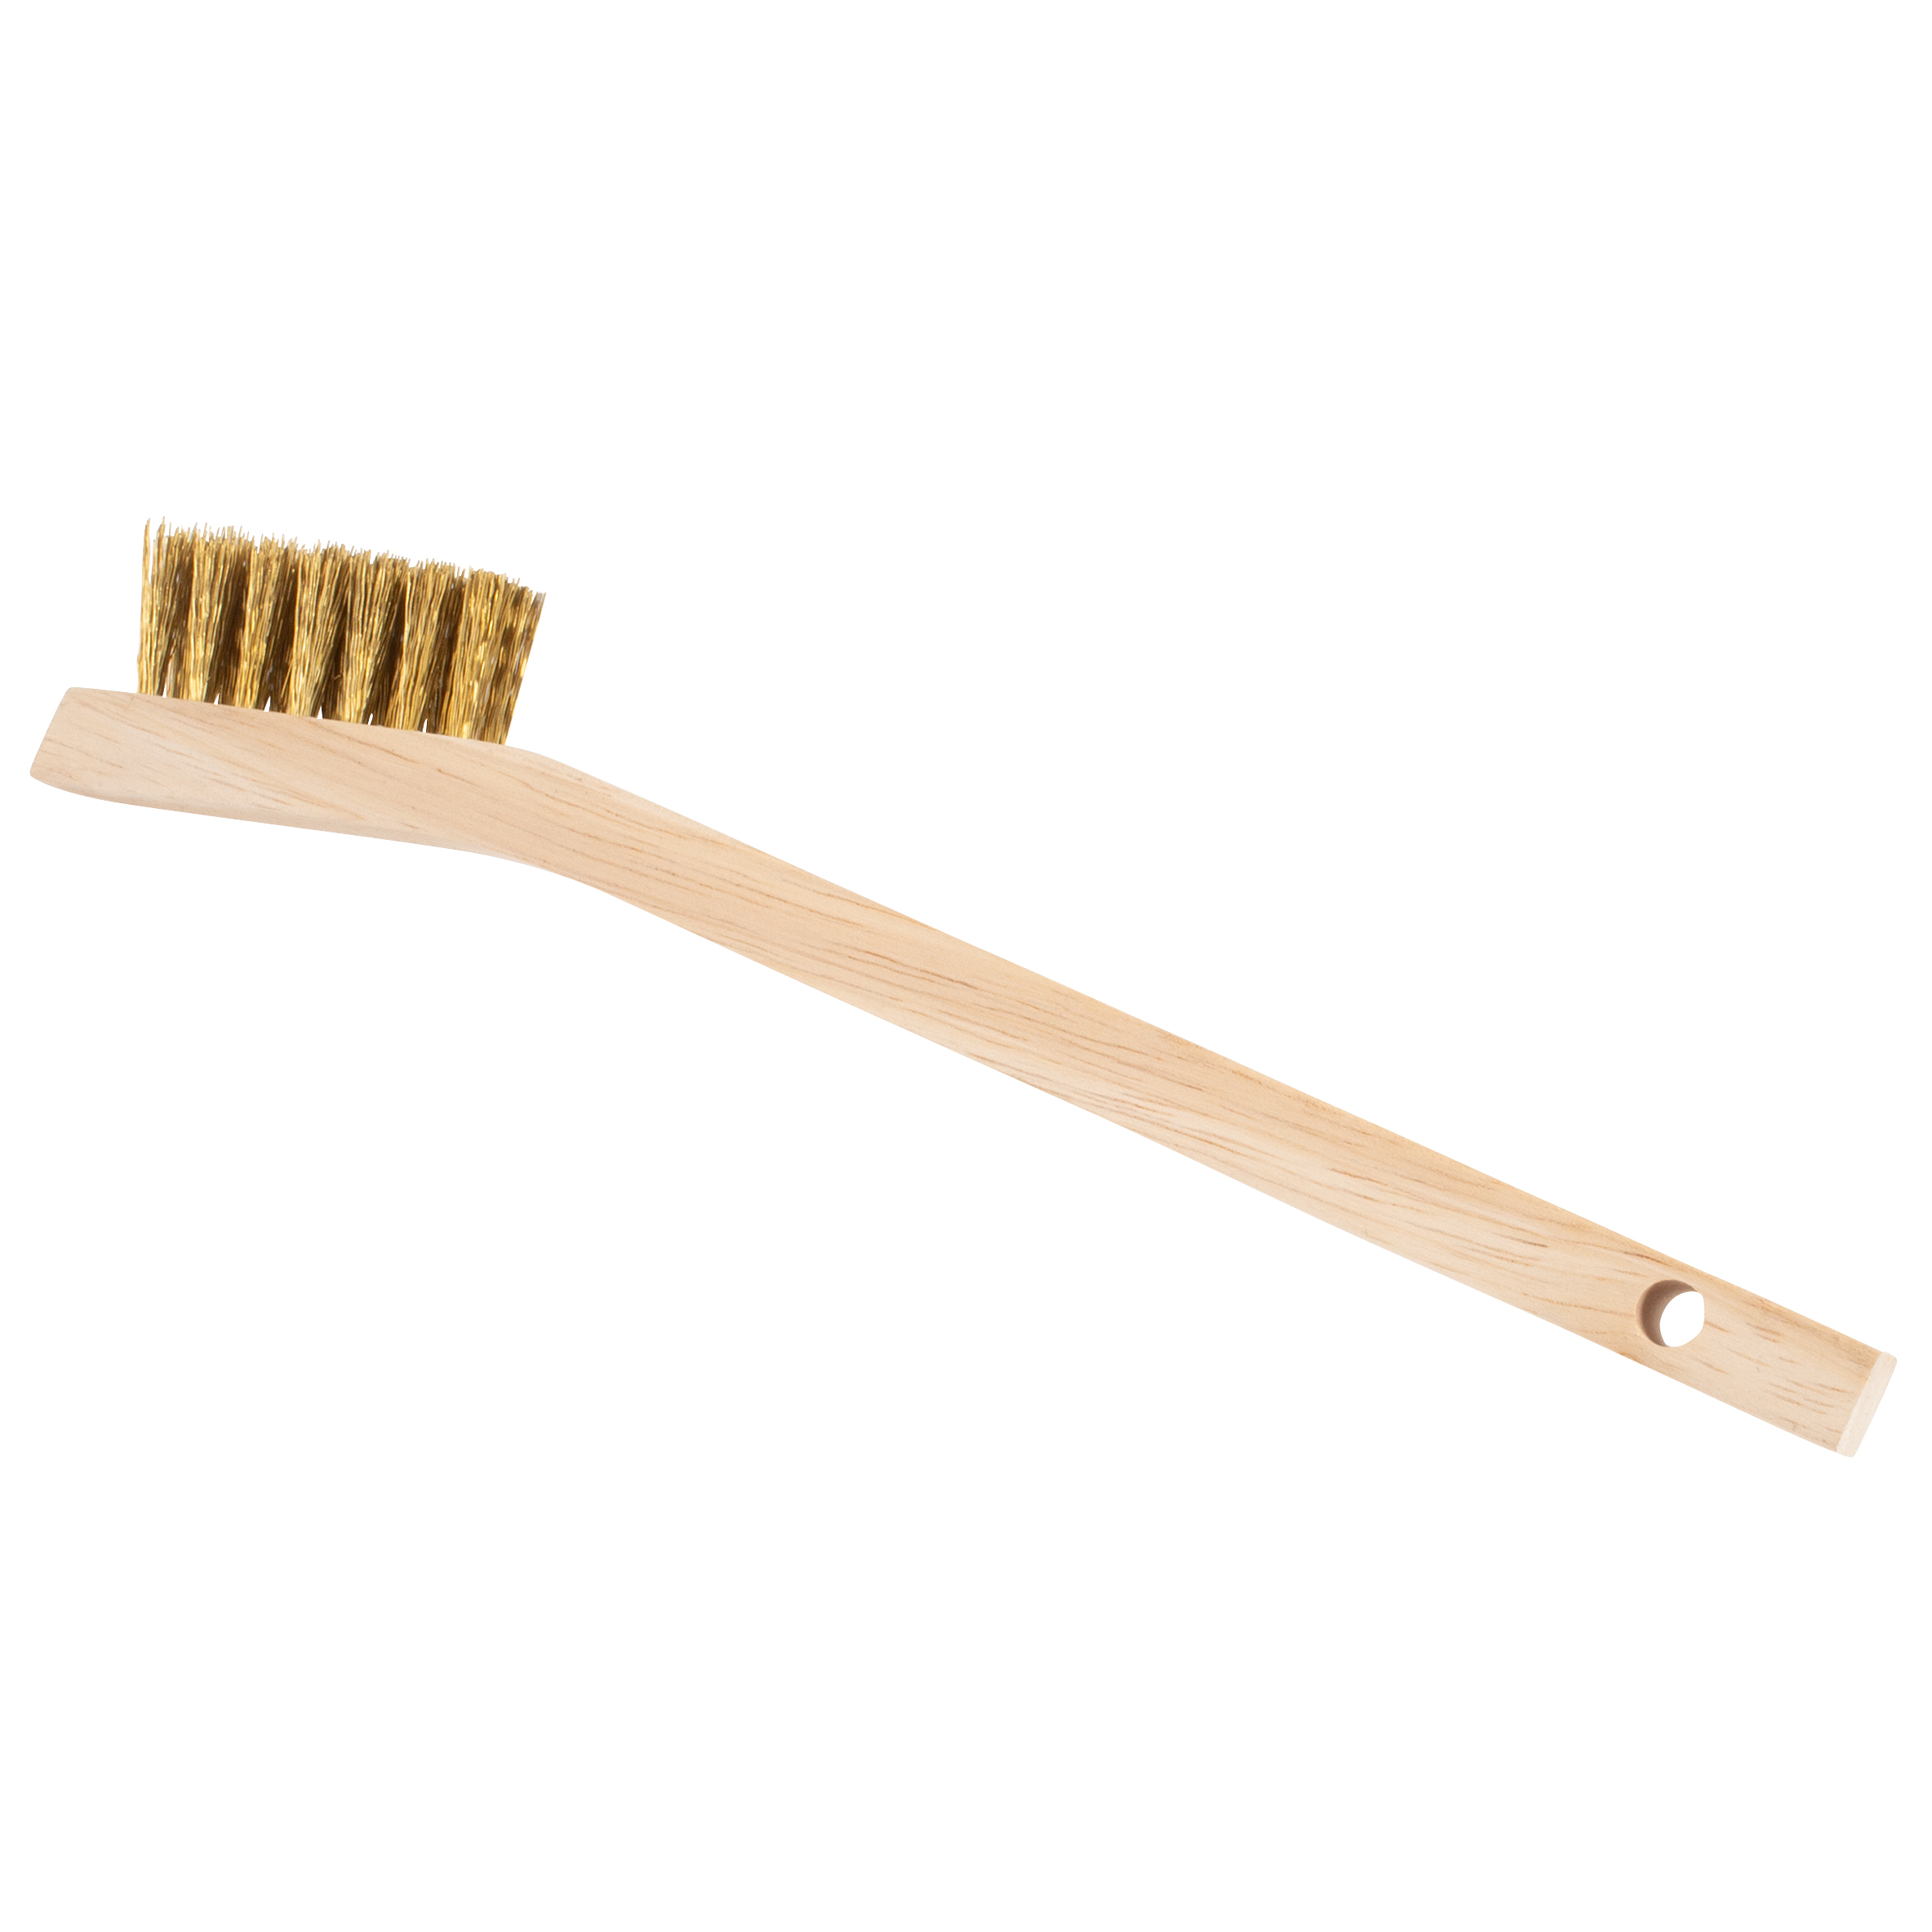 Small Brass Scratch Brush - 7 1/4 with Wooden Handle. - Shark